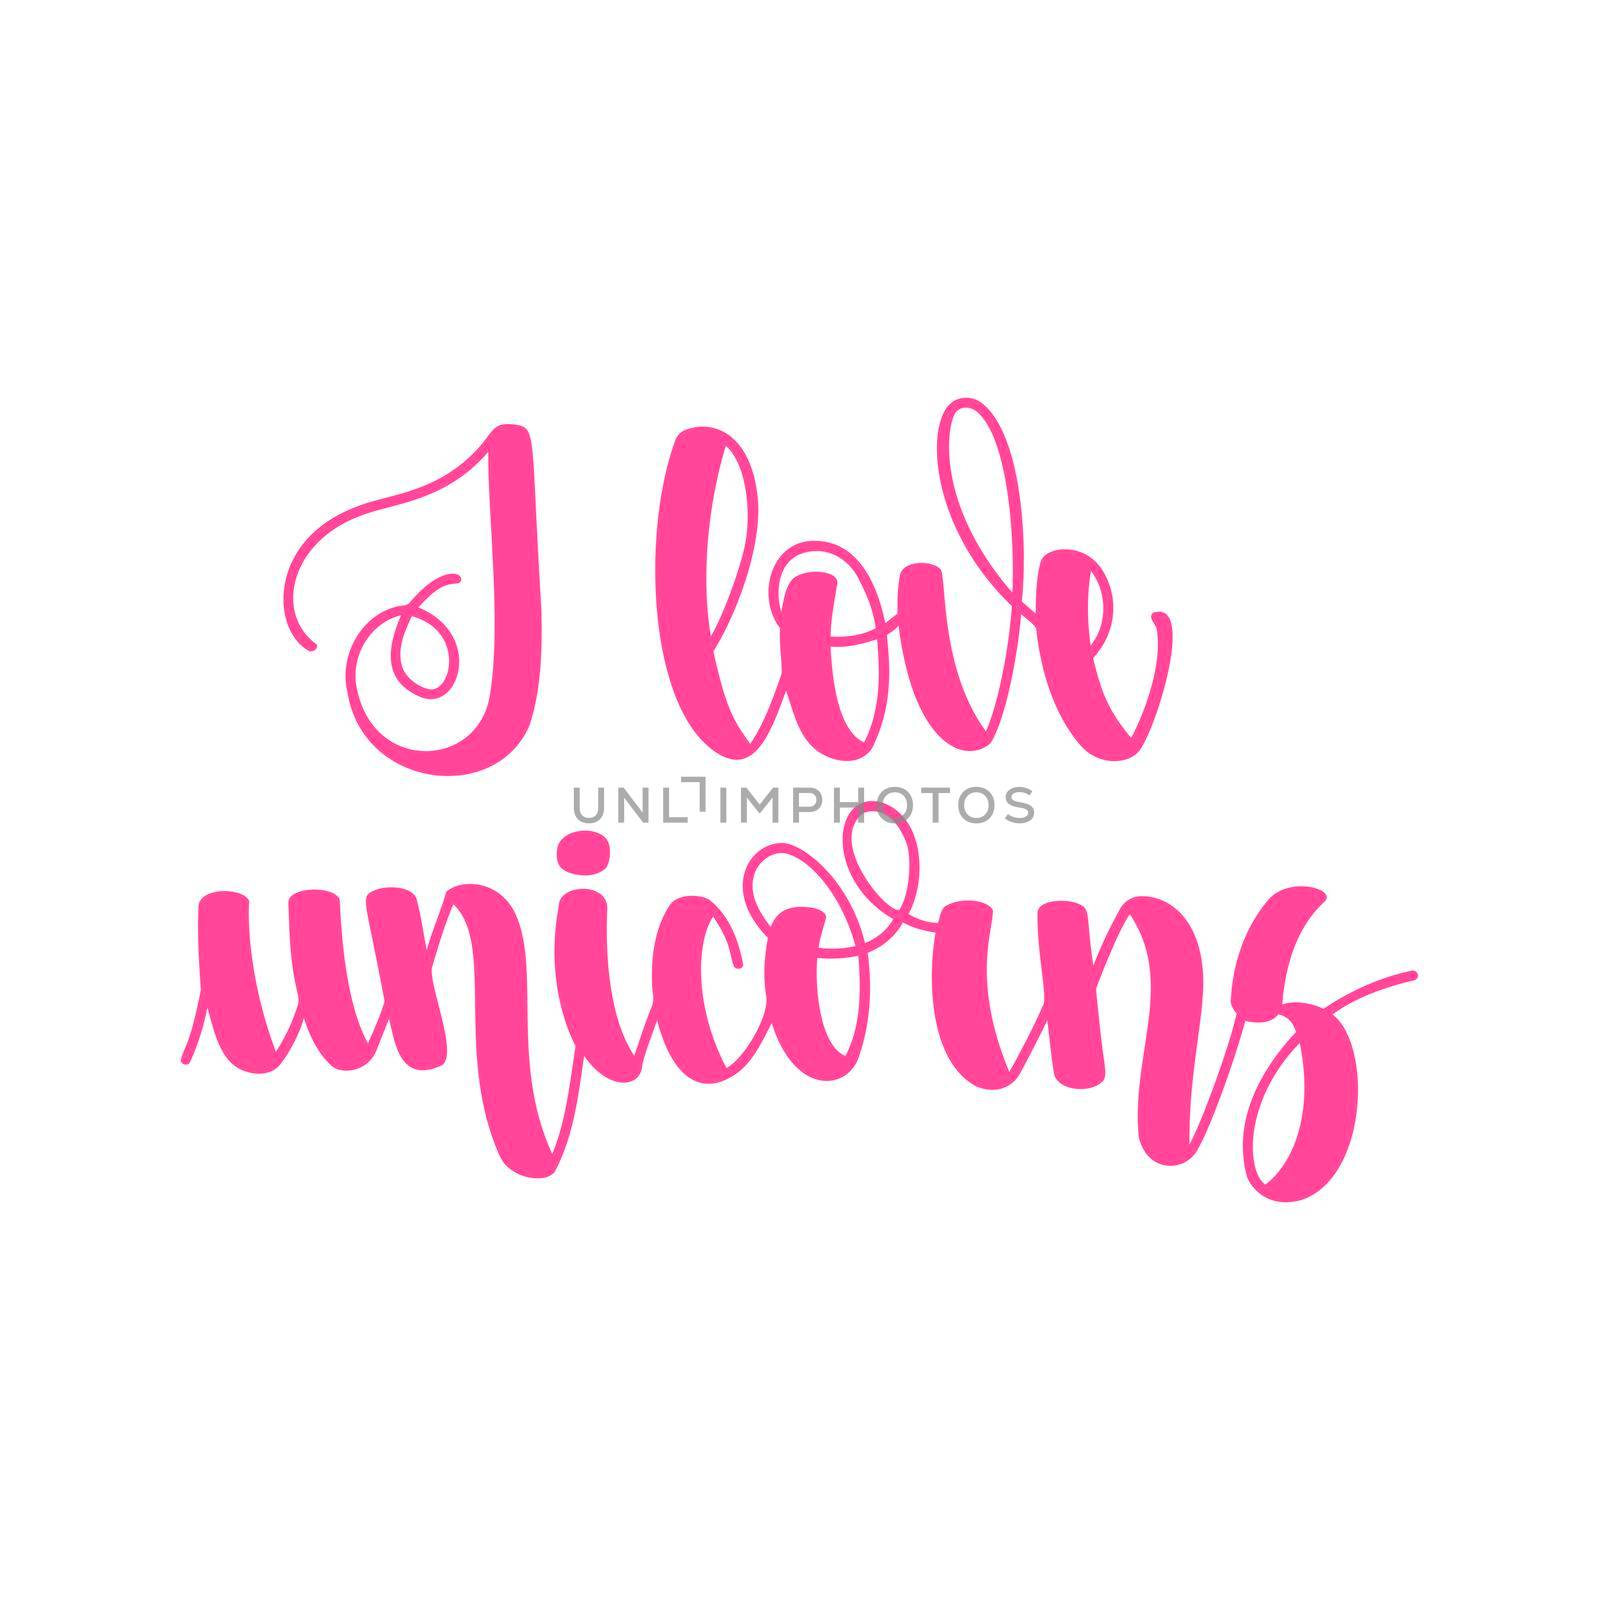 I love unicoI love unicorns. Handwritten lettering isolated on white background. illustration for posters, cards, print on t-shirts and much more by Marin4ik